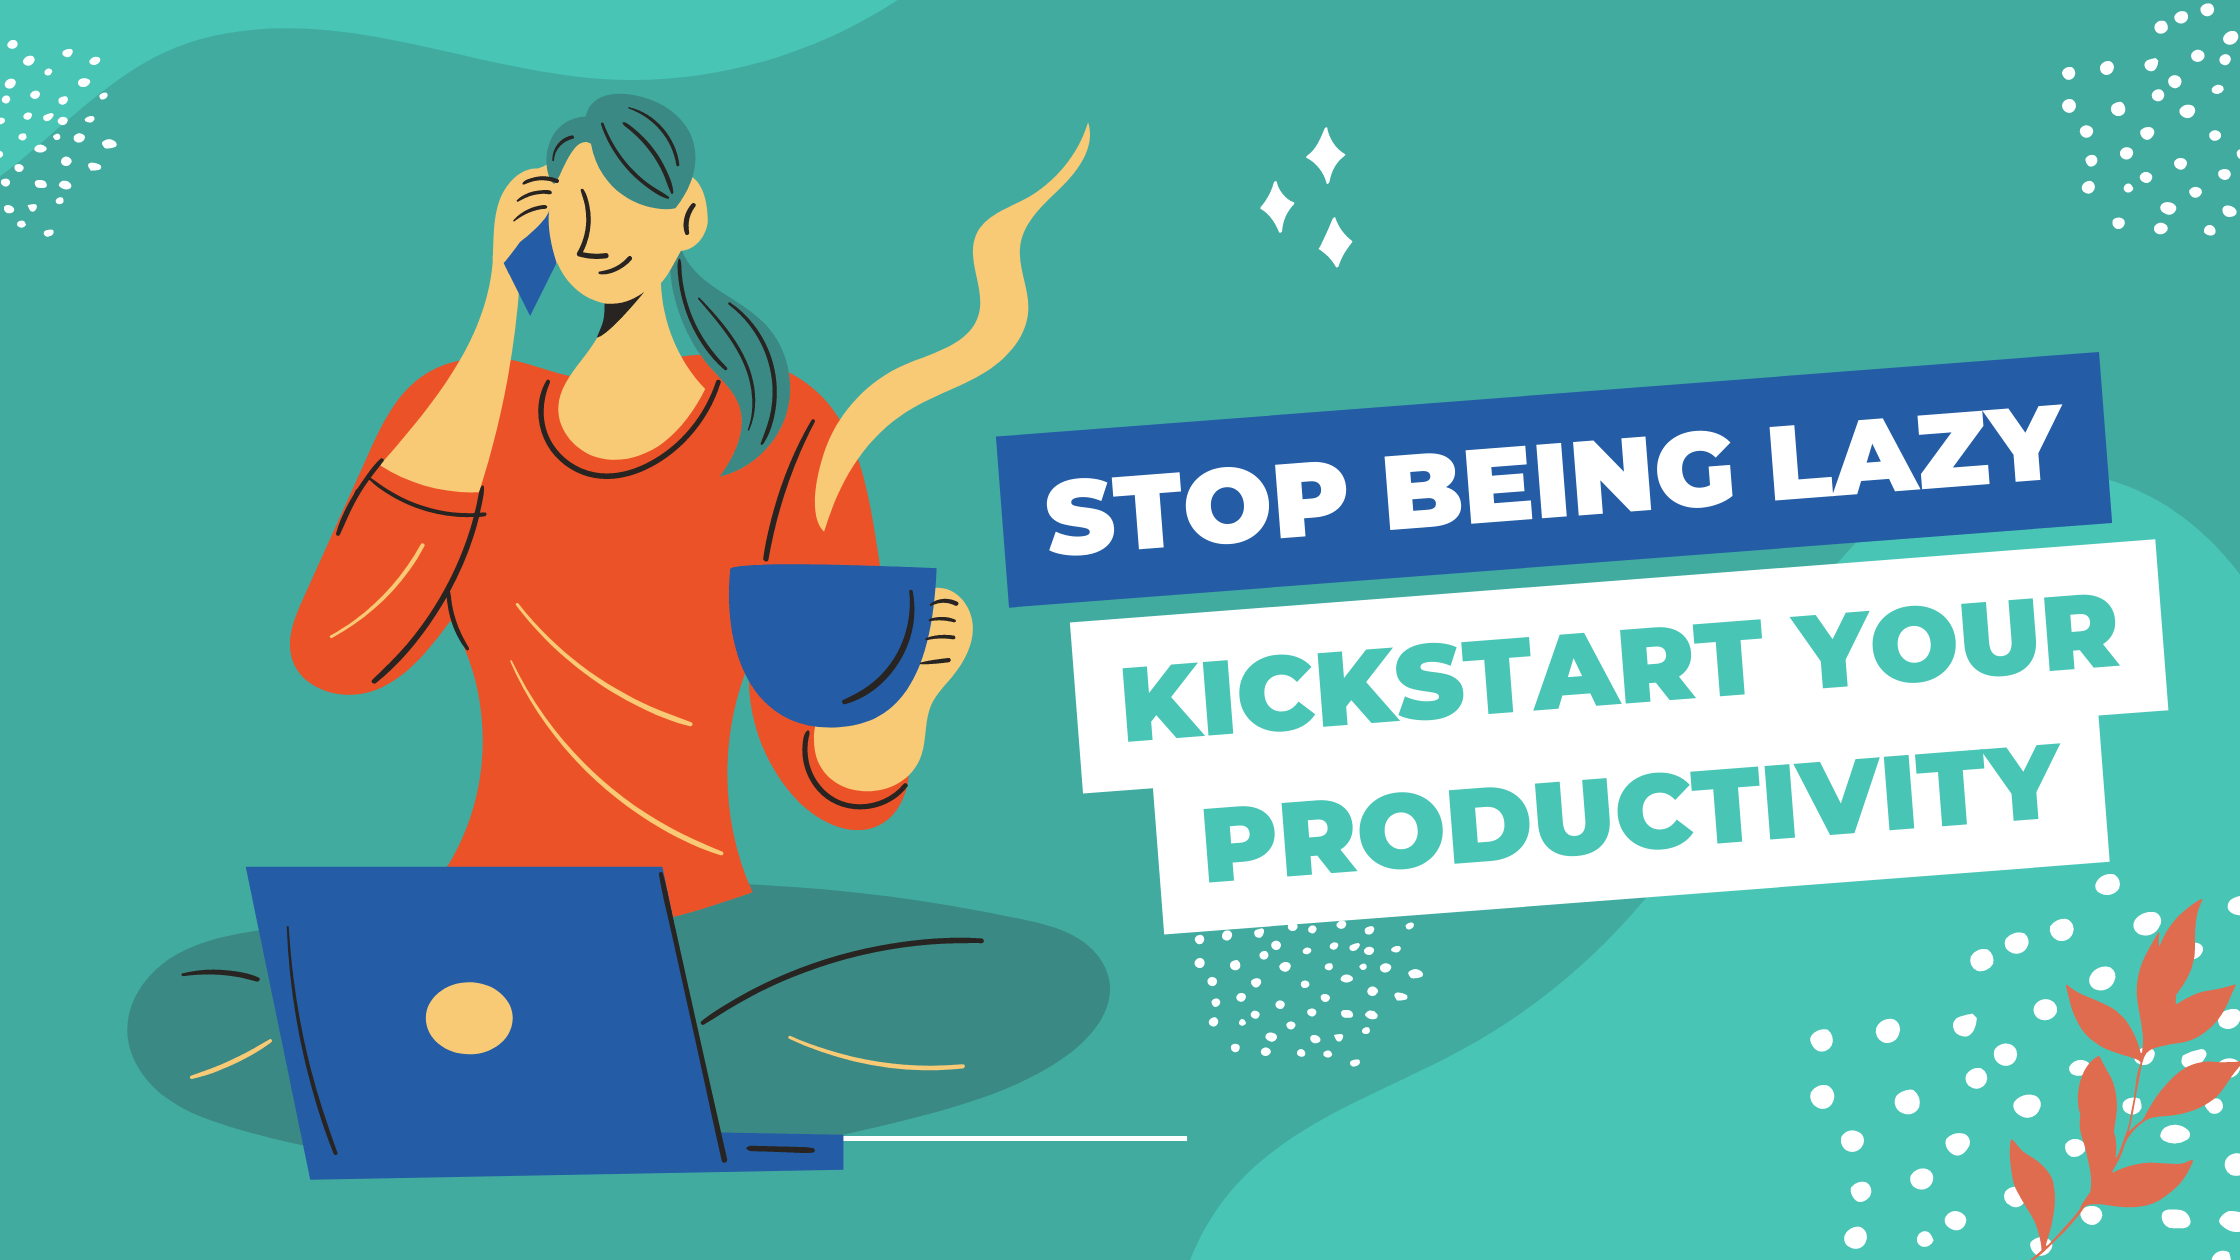 How to Stop Being Lazy: Kickstart Your Productivity